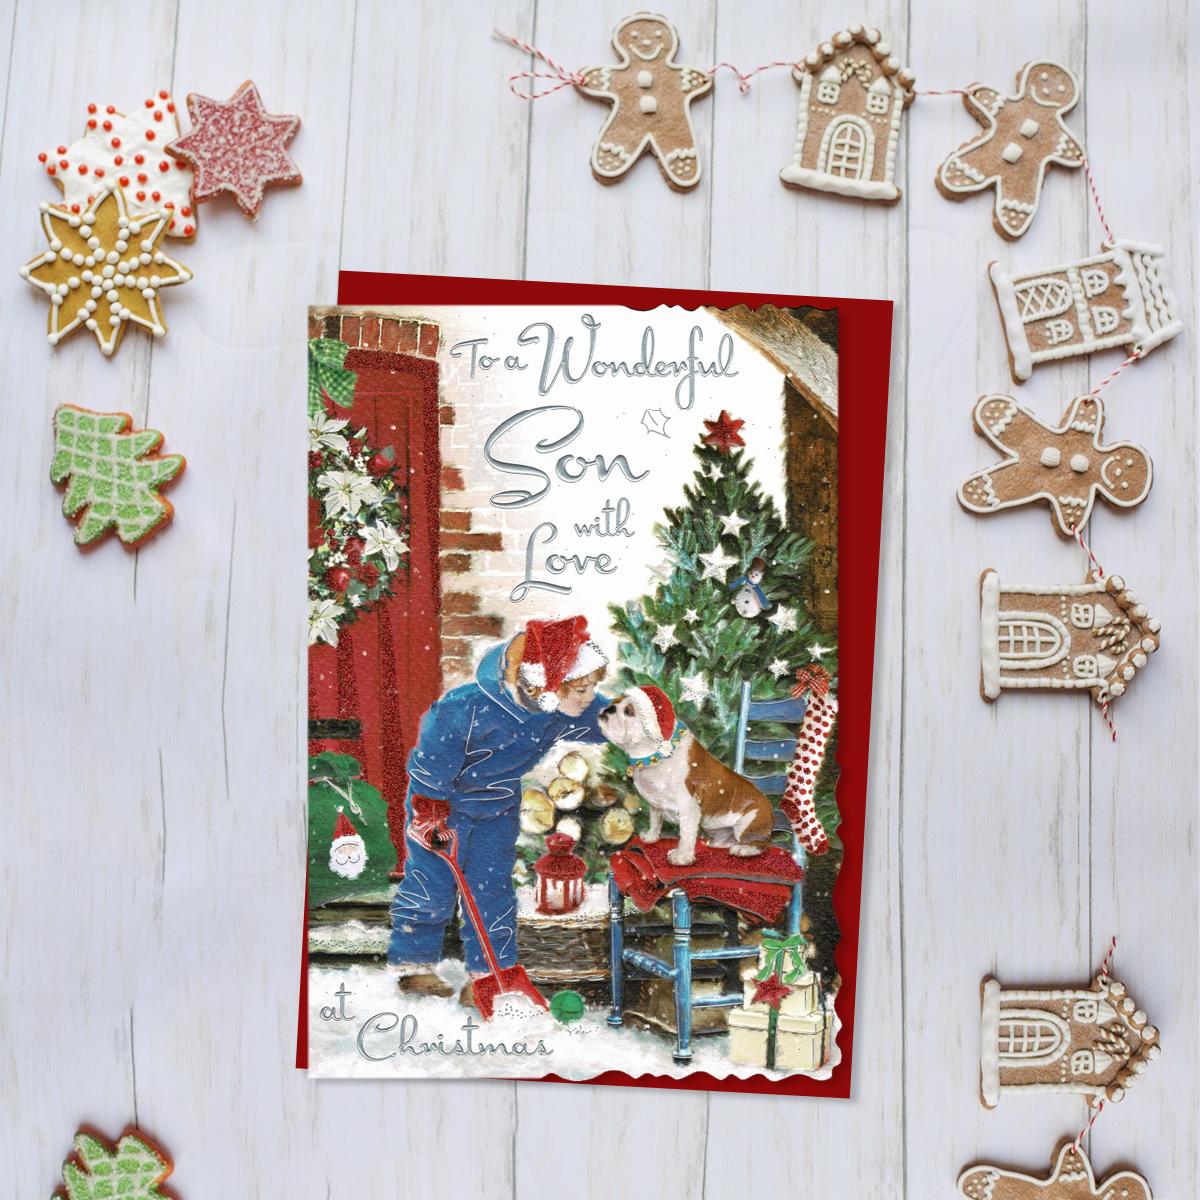 To A Wonderful Son With Love Featuring A Boy With His Dog In The Snow! Finished With Silver Foiled Lettering, Red Glitter Detail And Red Envelope